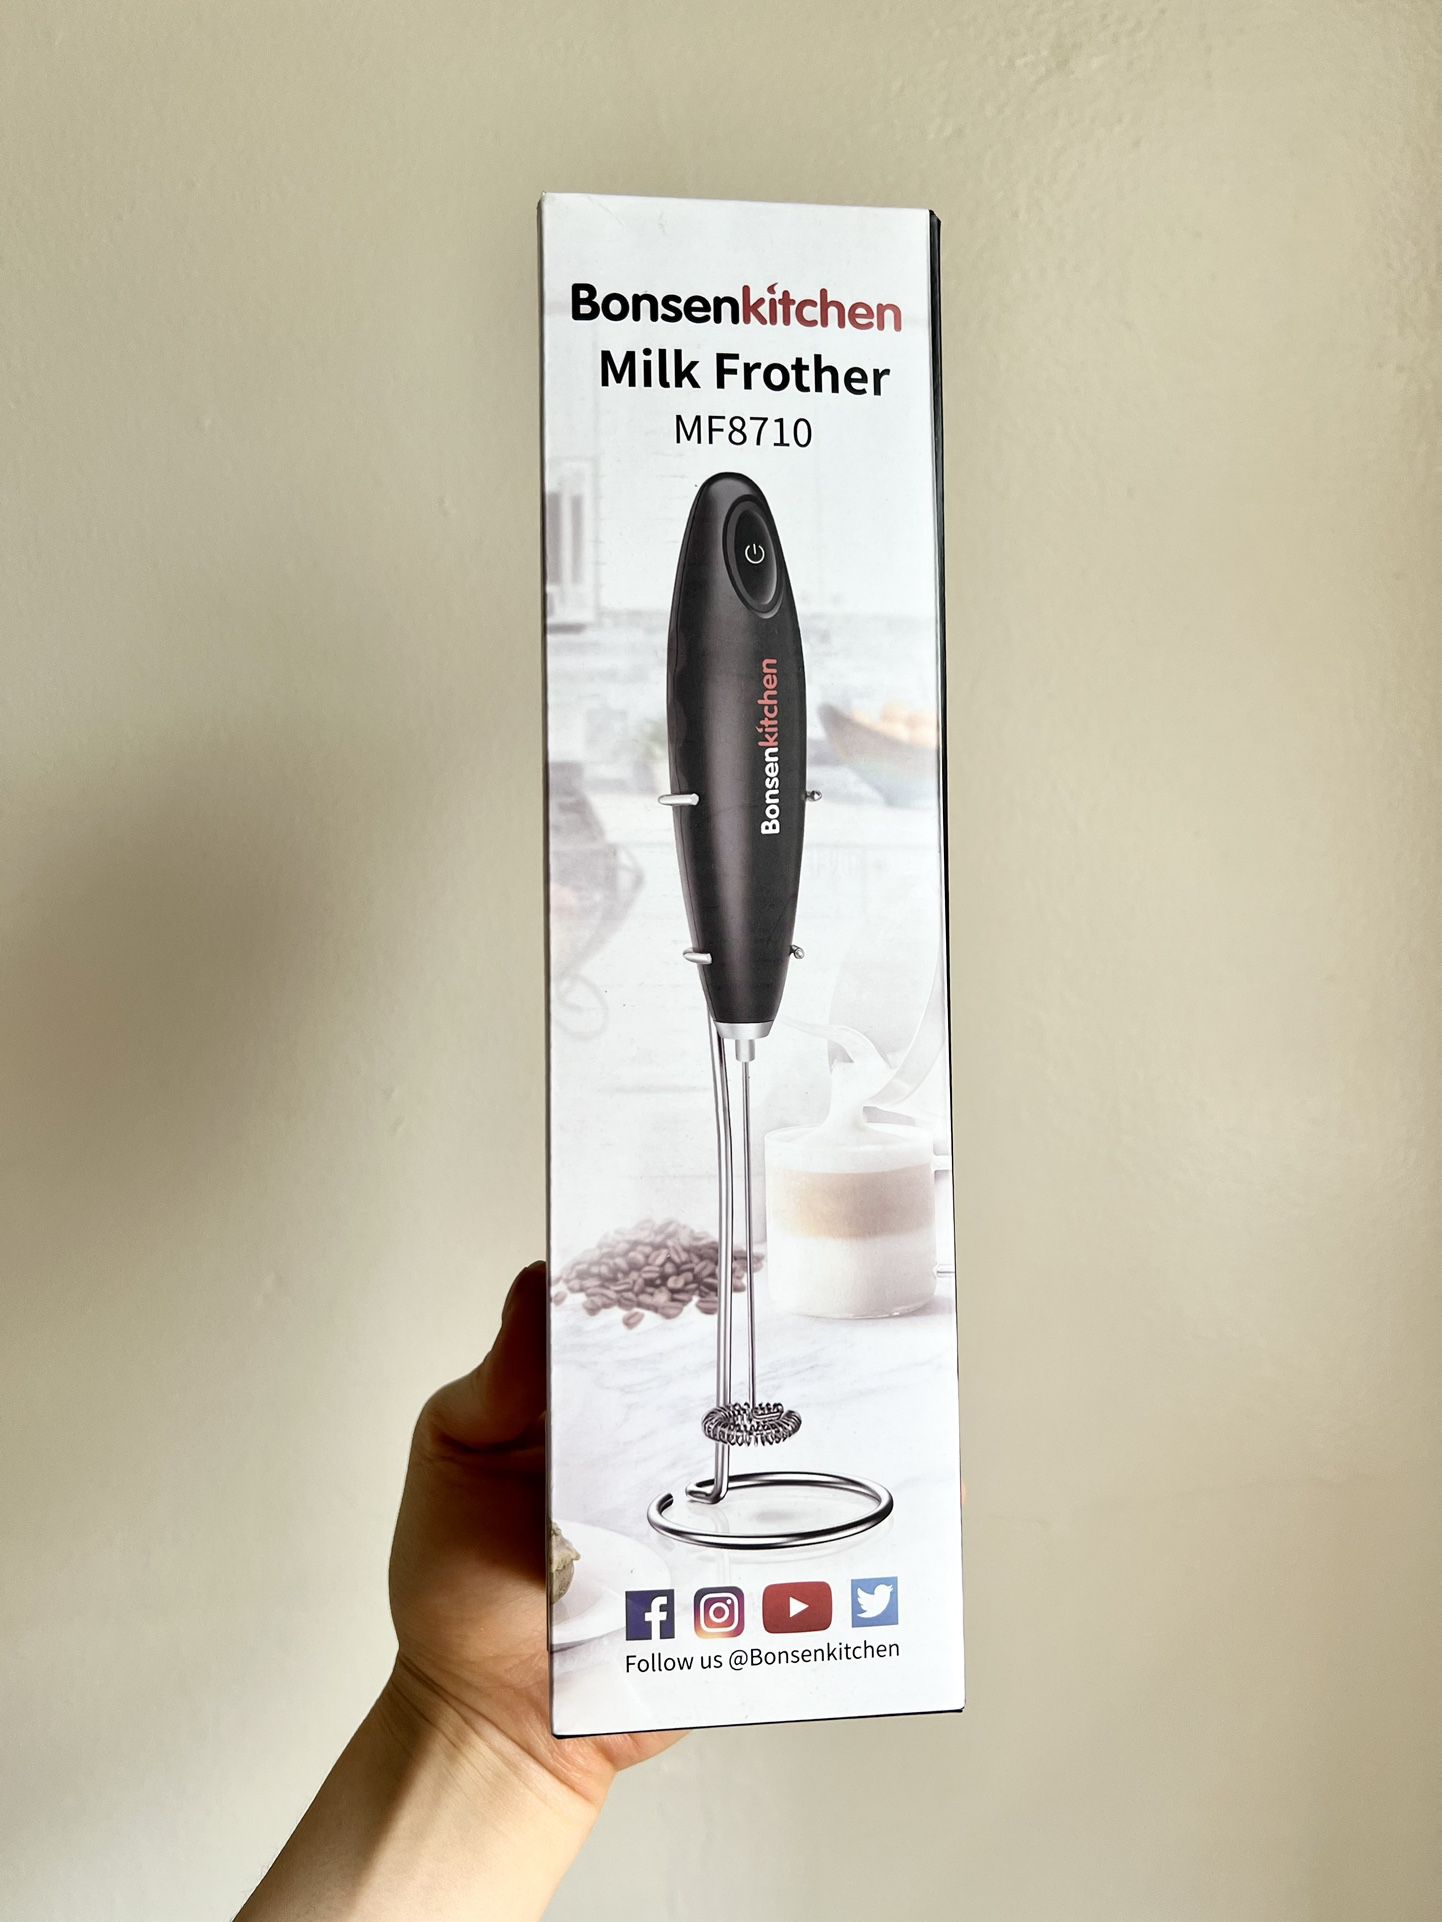 NEW IN BOX Rae Dunn FROTH Electric Milk Frother White Stainless Almond  Milk for Sale in Paramount, CA - OfferUp